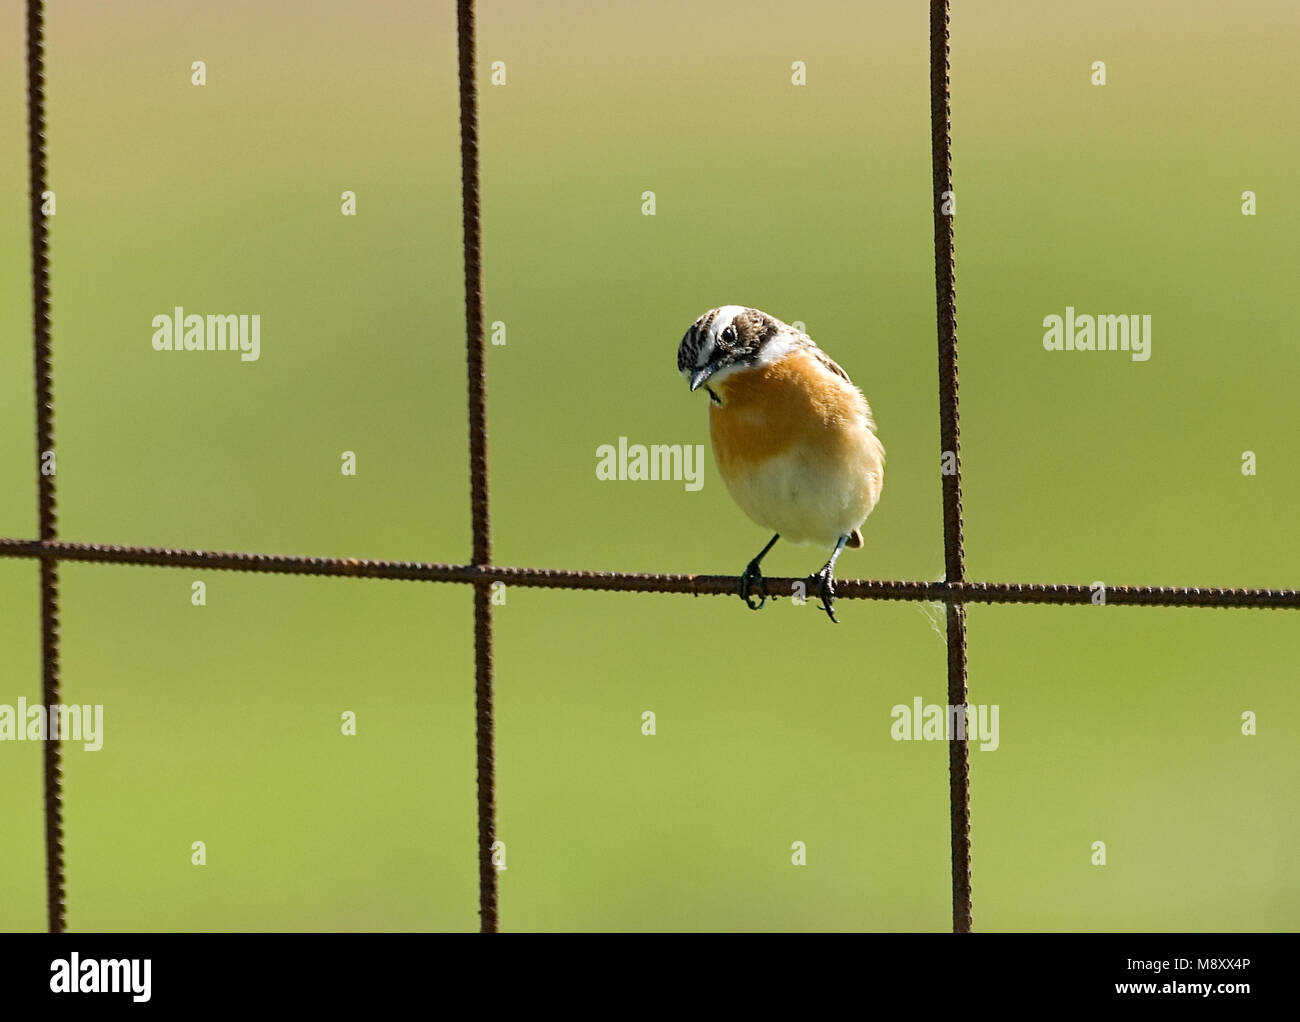 Whinchat perched; Paapje zittend Stock Photo